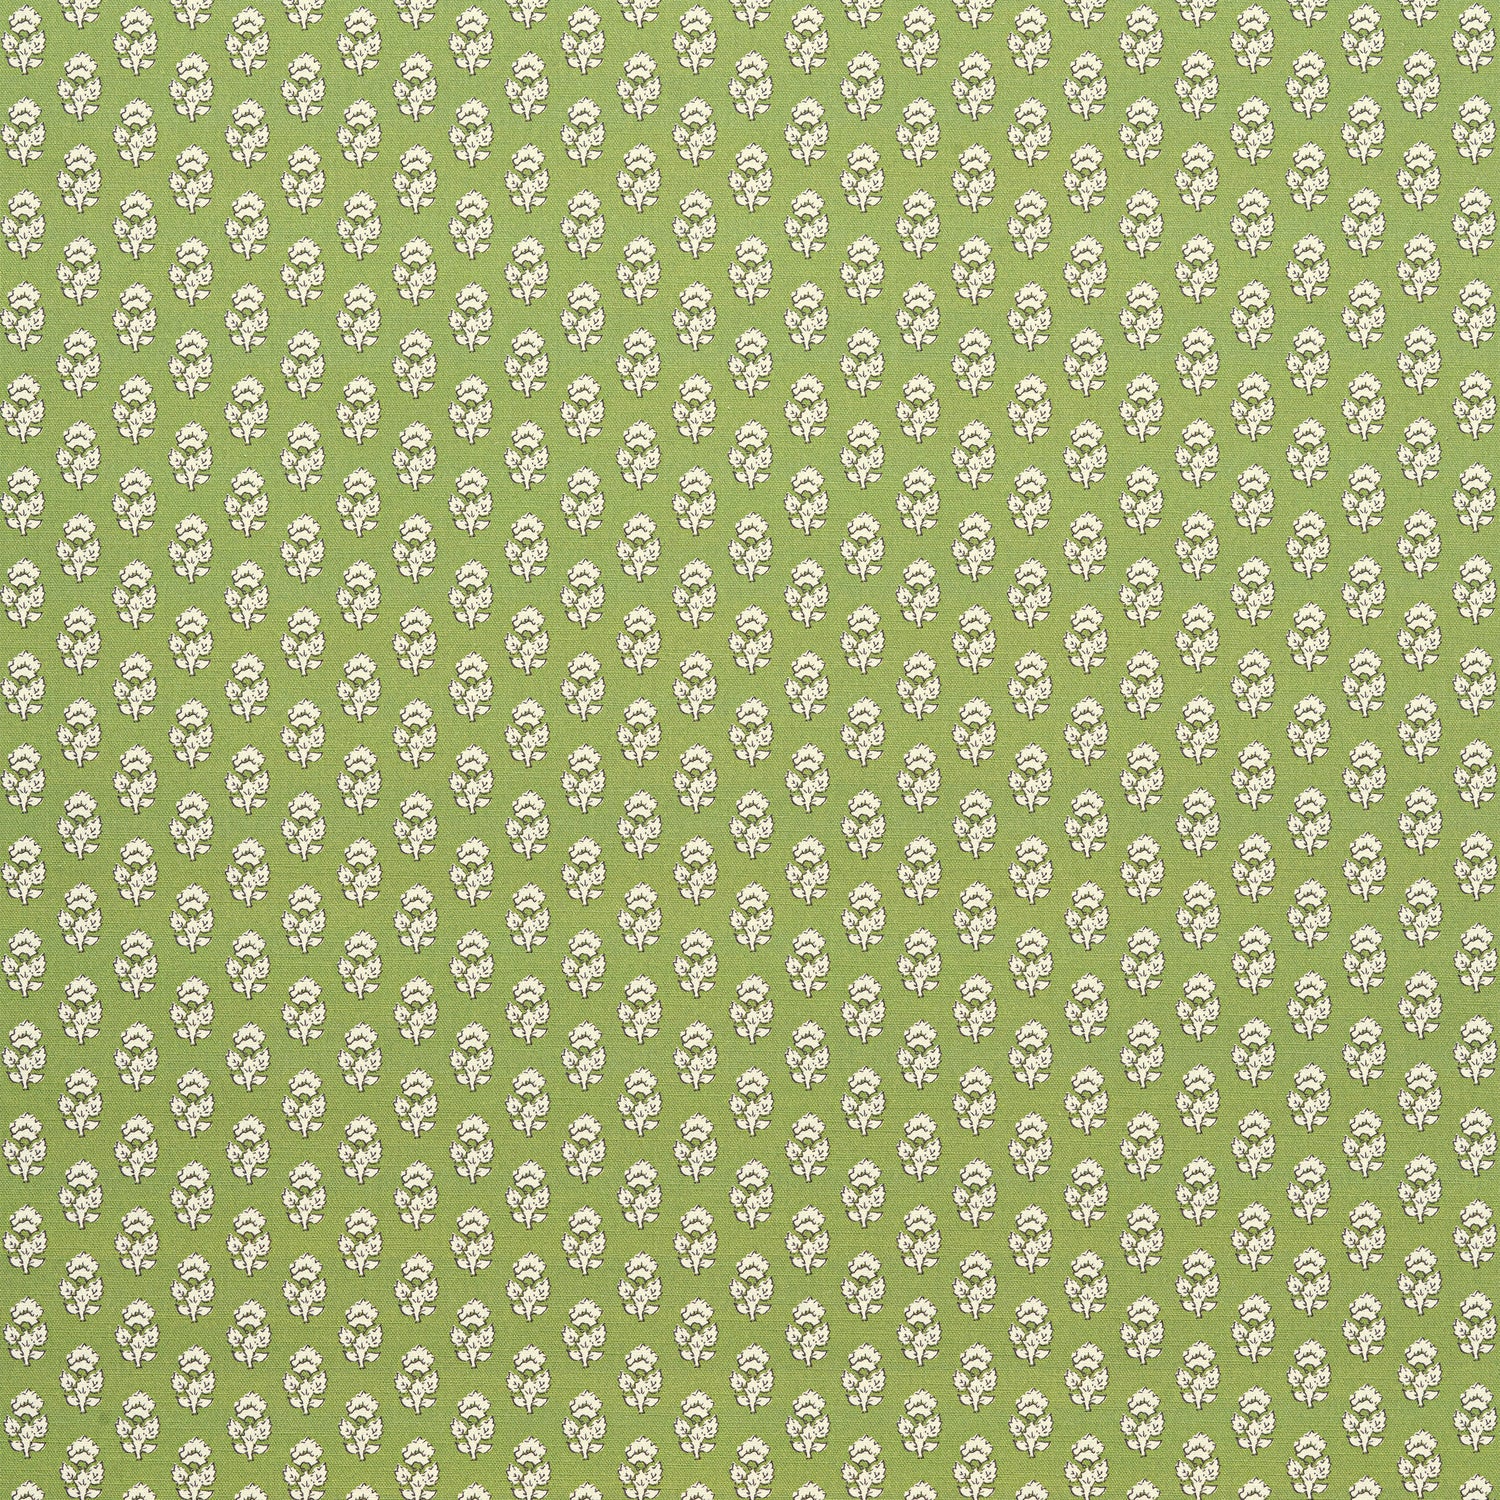 Julian fabric in green color - pattern number AF15160 - by Anna French in the Antilles collection